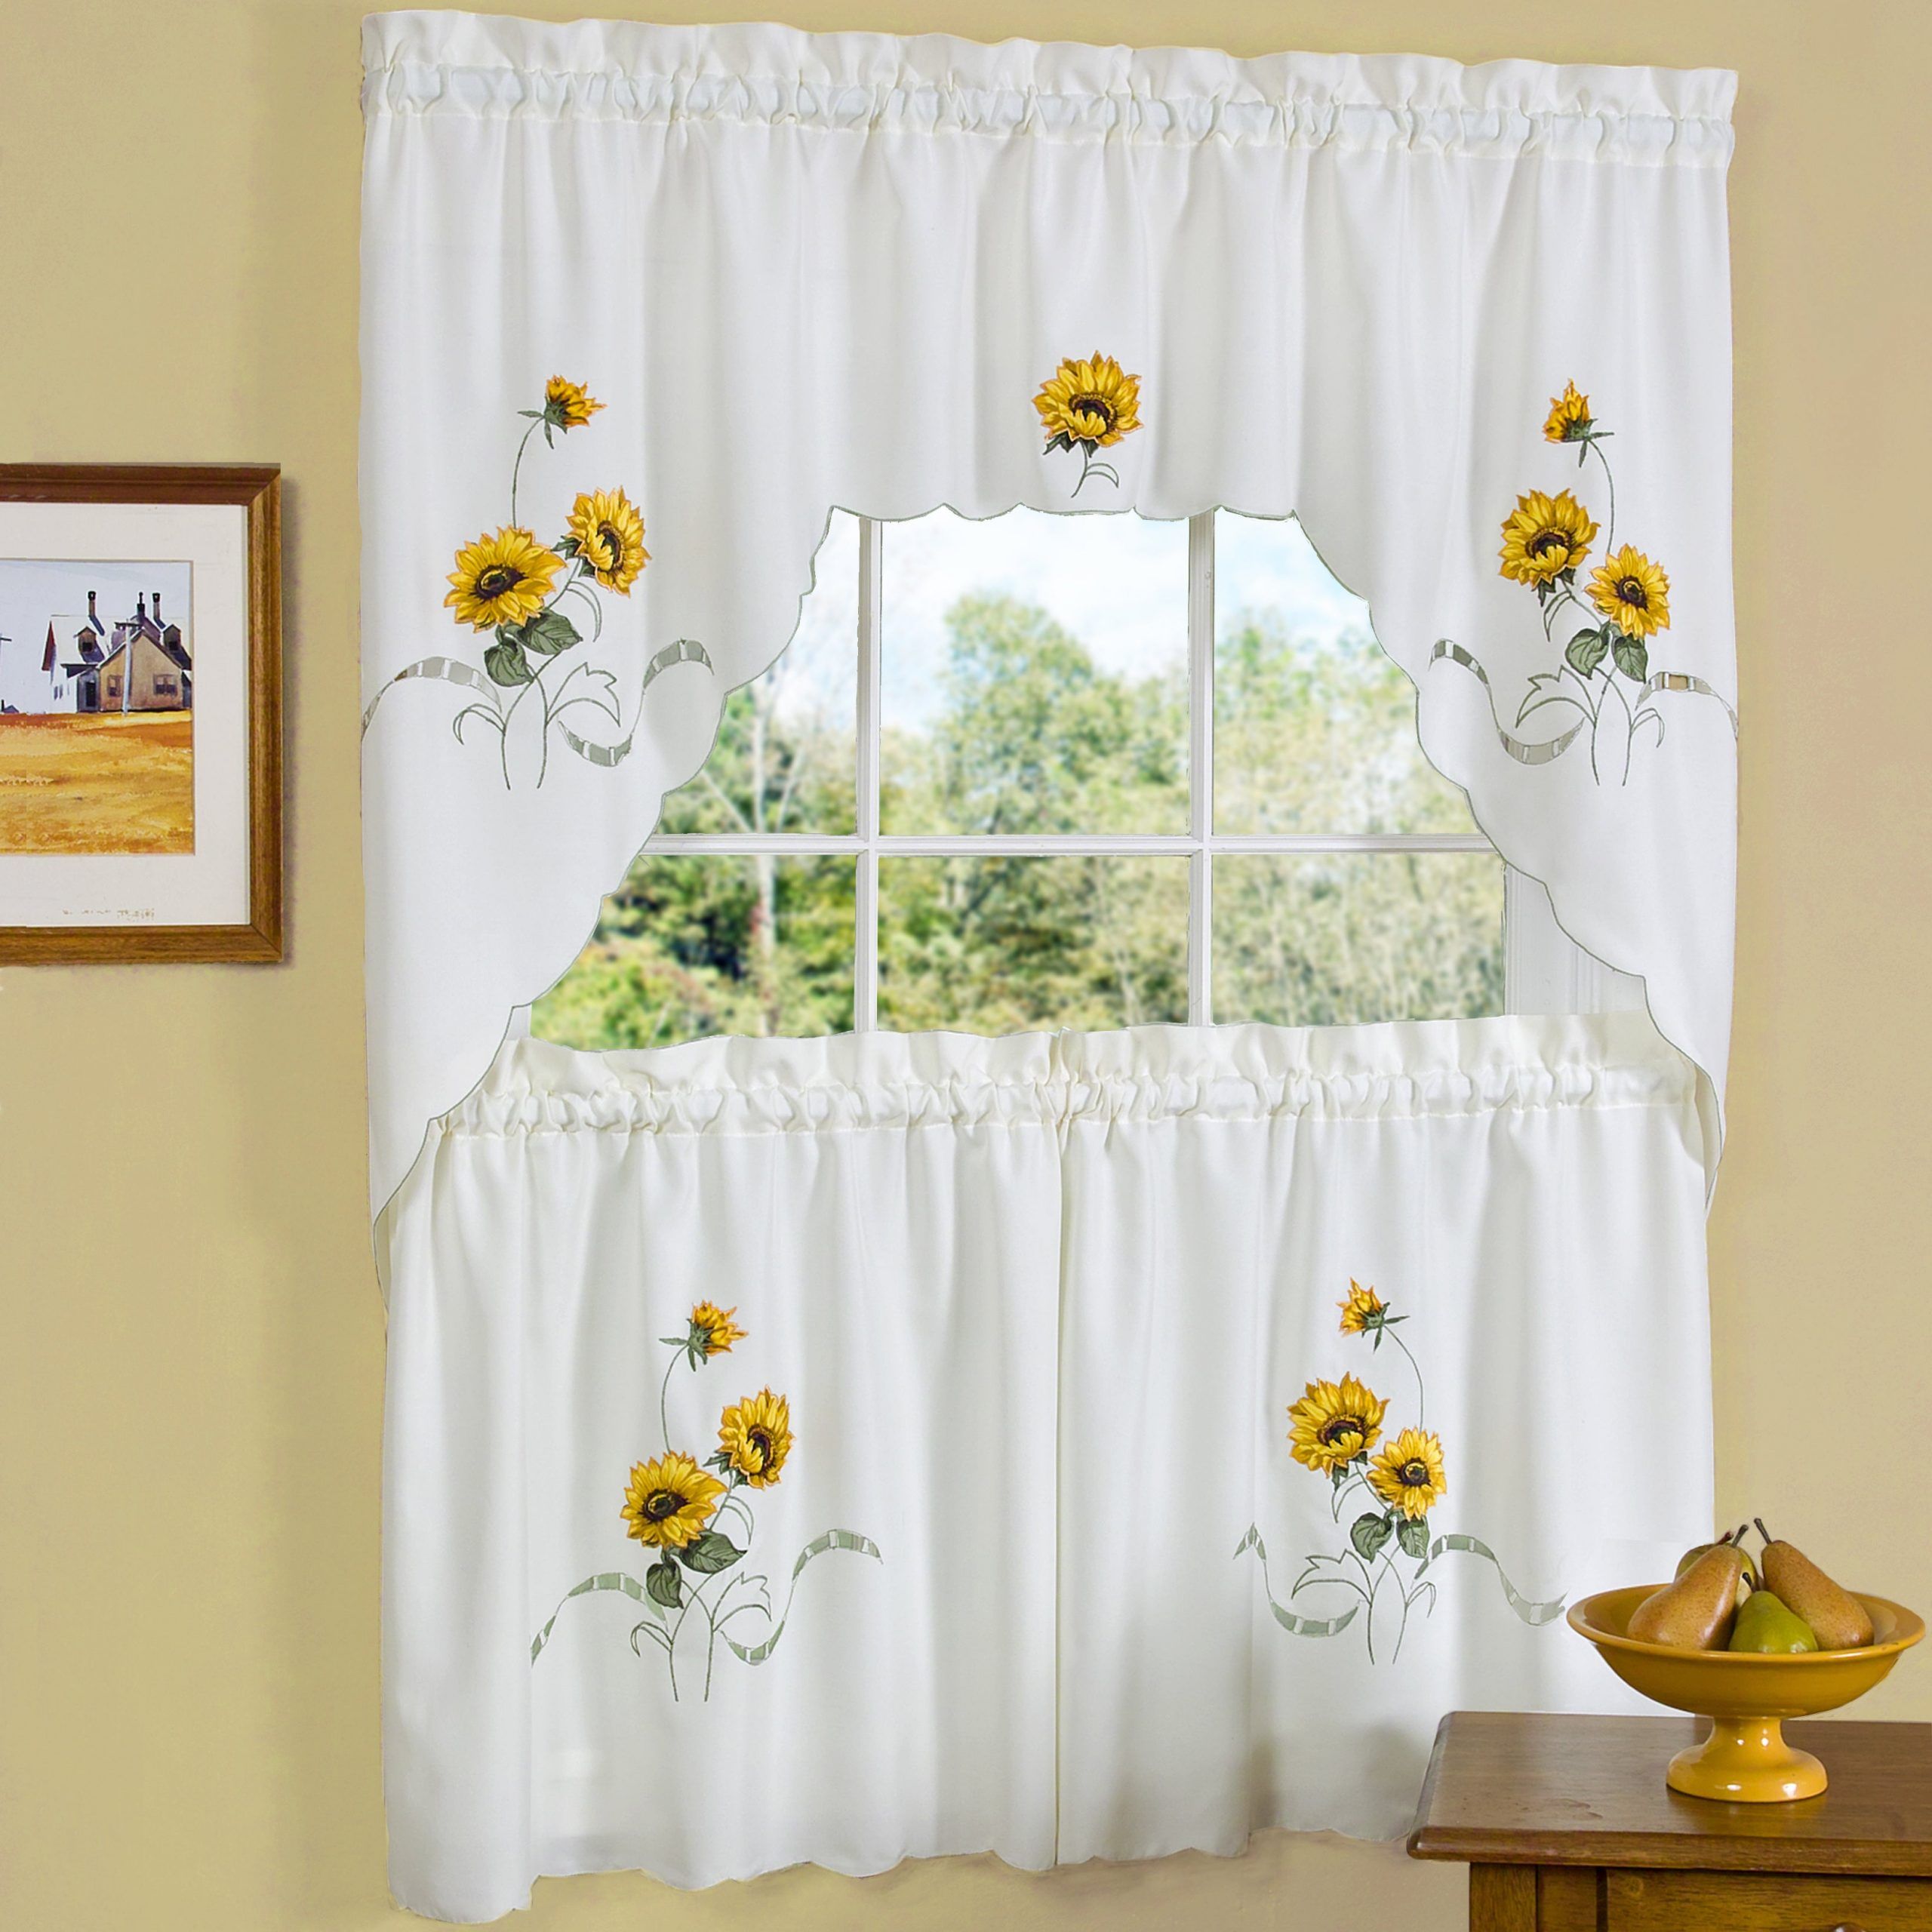 Traditional Two Piece Tailored Tier And Swag Window Curtains Set With  Embroidered Yellow Sunflowers – 36 Inch With Window Curtains Sets With Colorful Marketplace Vegetable And Sunflower Print (Photo 3 of 20)